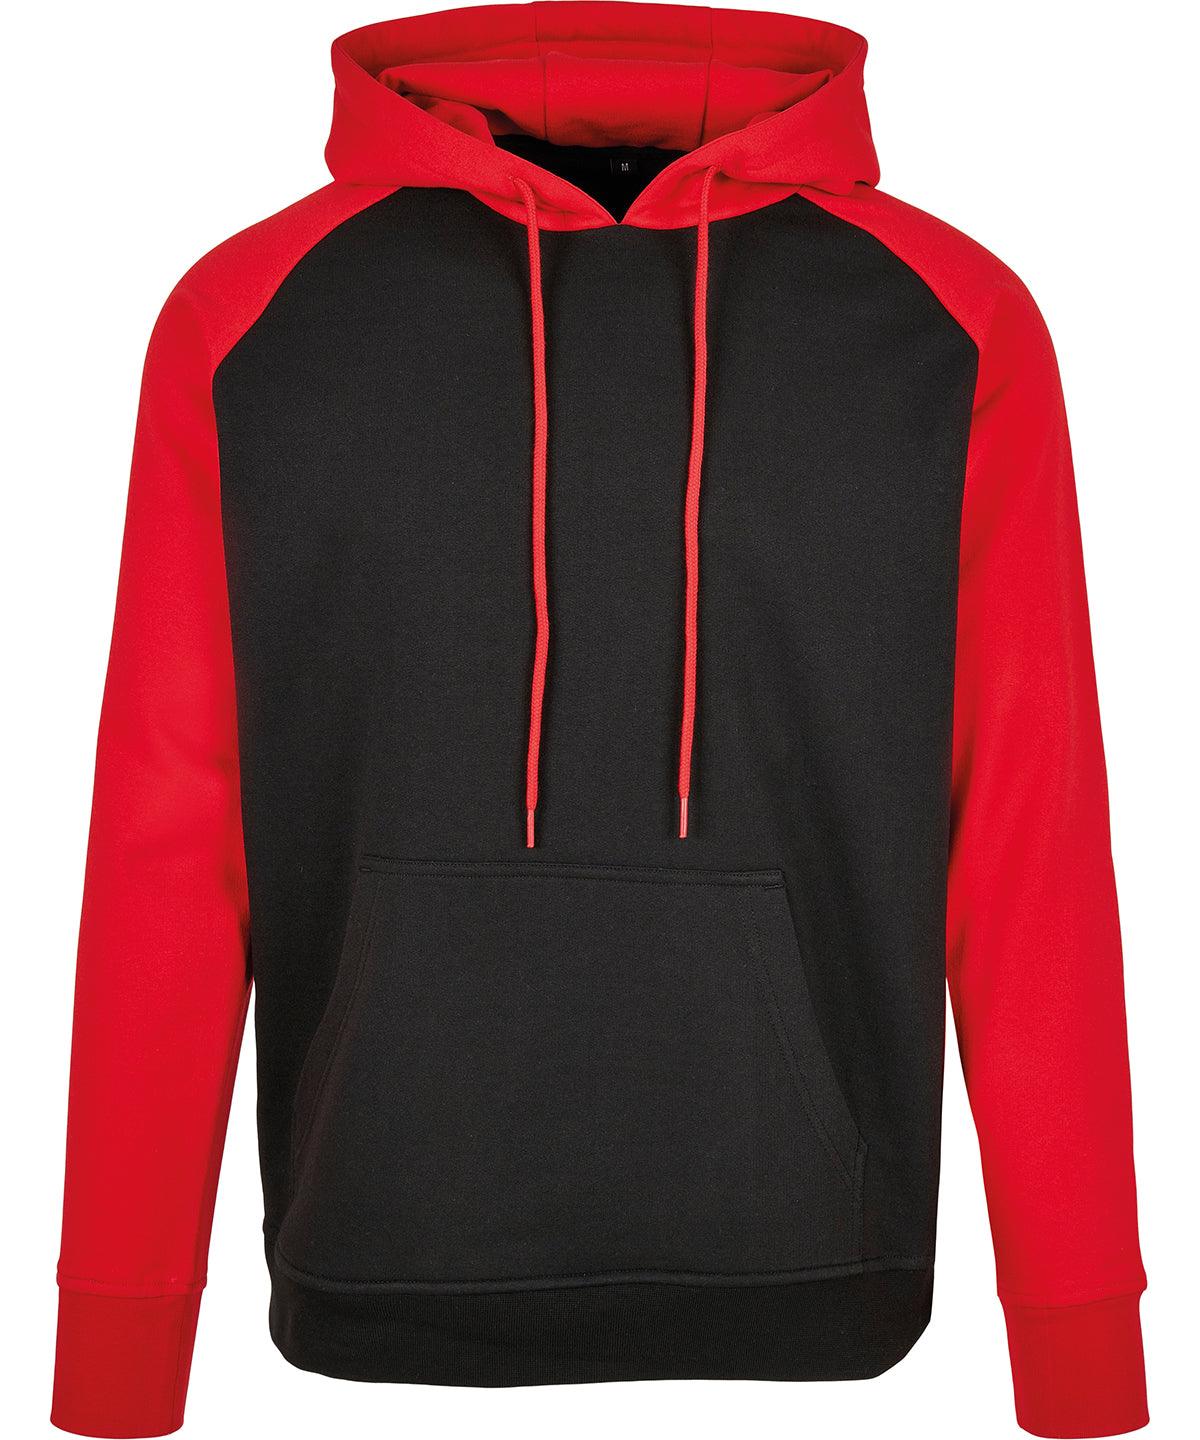 Black/Red - Basic raglan hoodie Hoodies Build Your Brand Basic Hoodies, New For 2021, New Styles For 2021, Plus Sizes, Rebrandable, Trending Schoolwear Centres